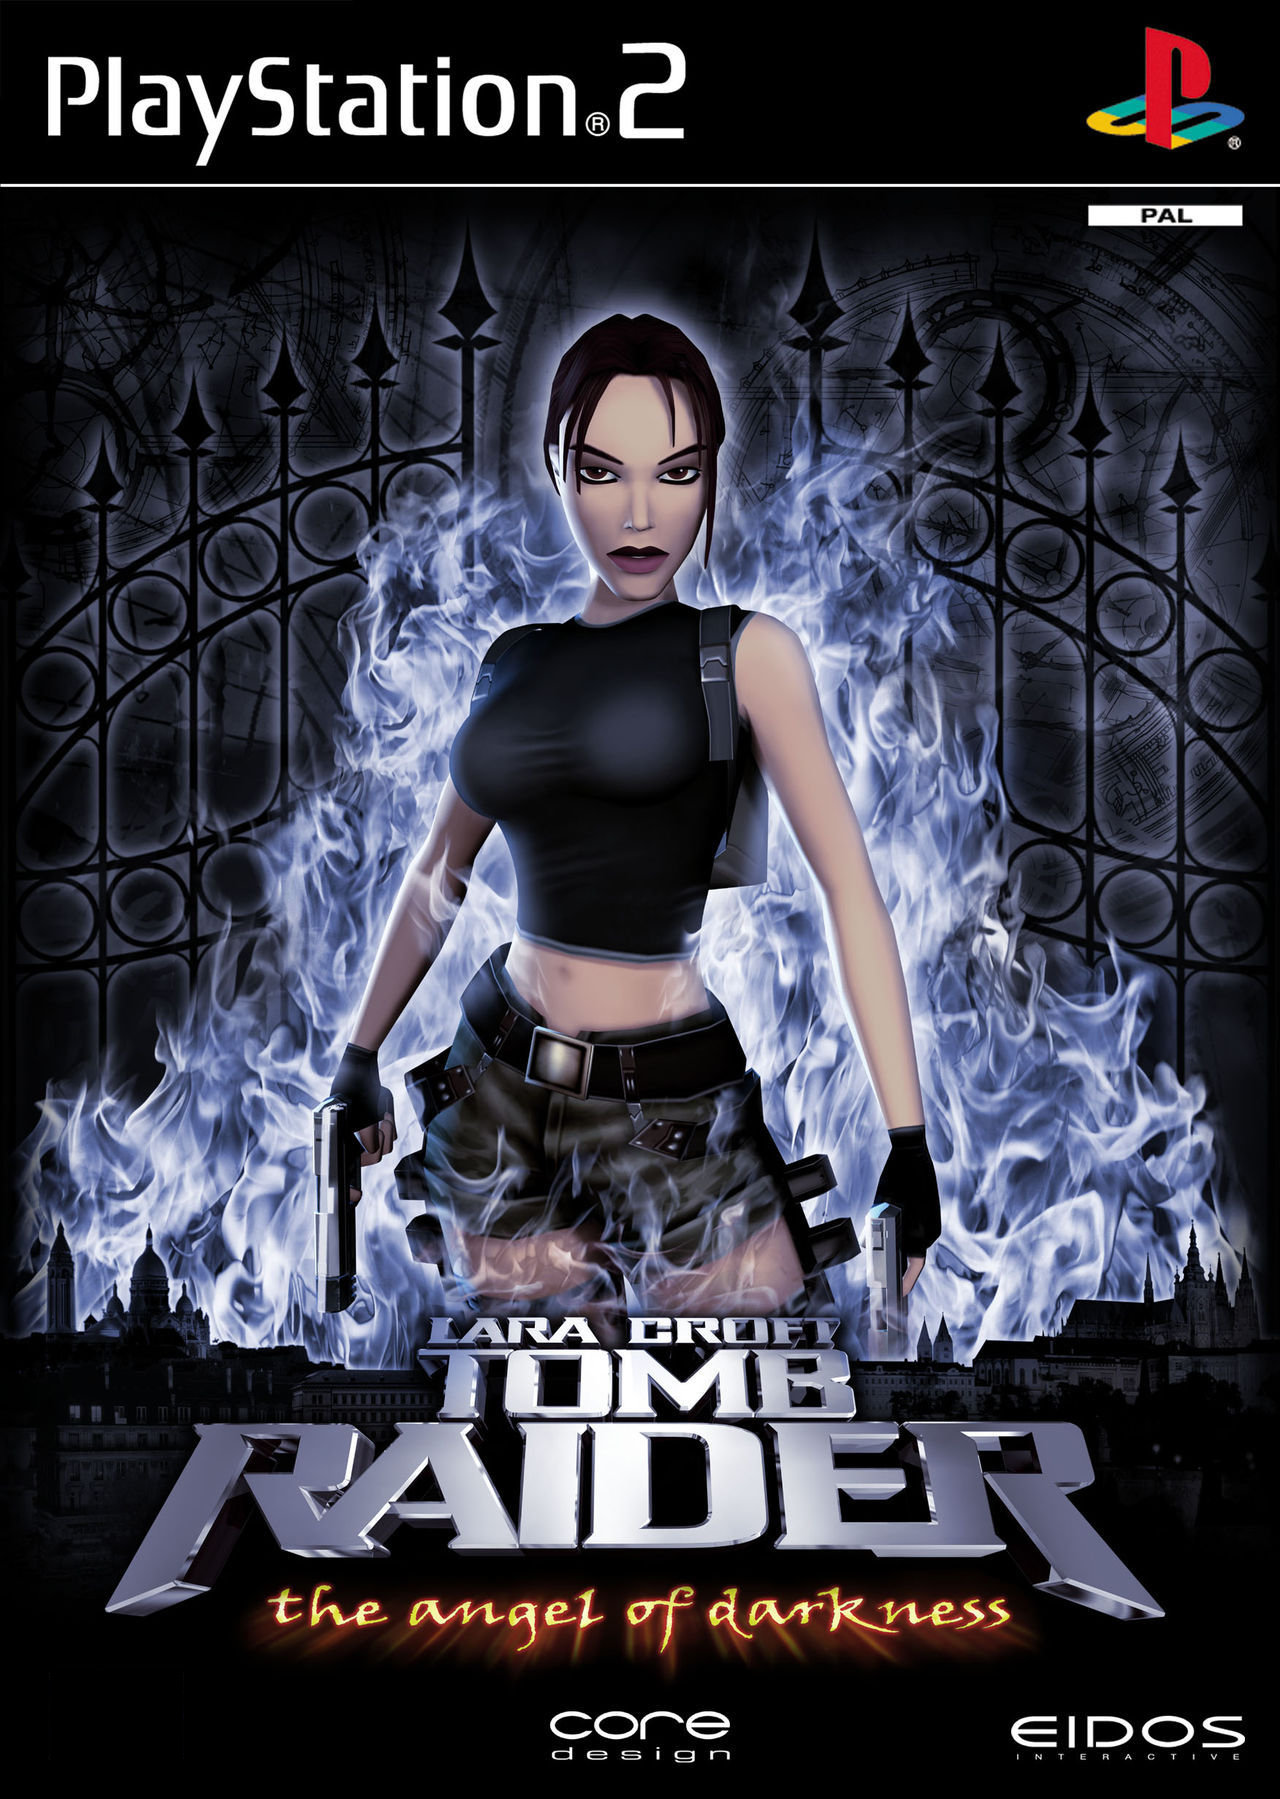 tomb raider angel of darkness on ps2